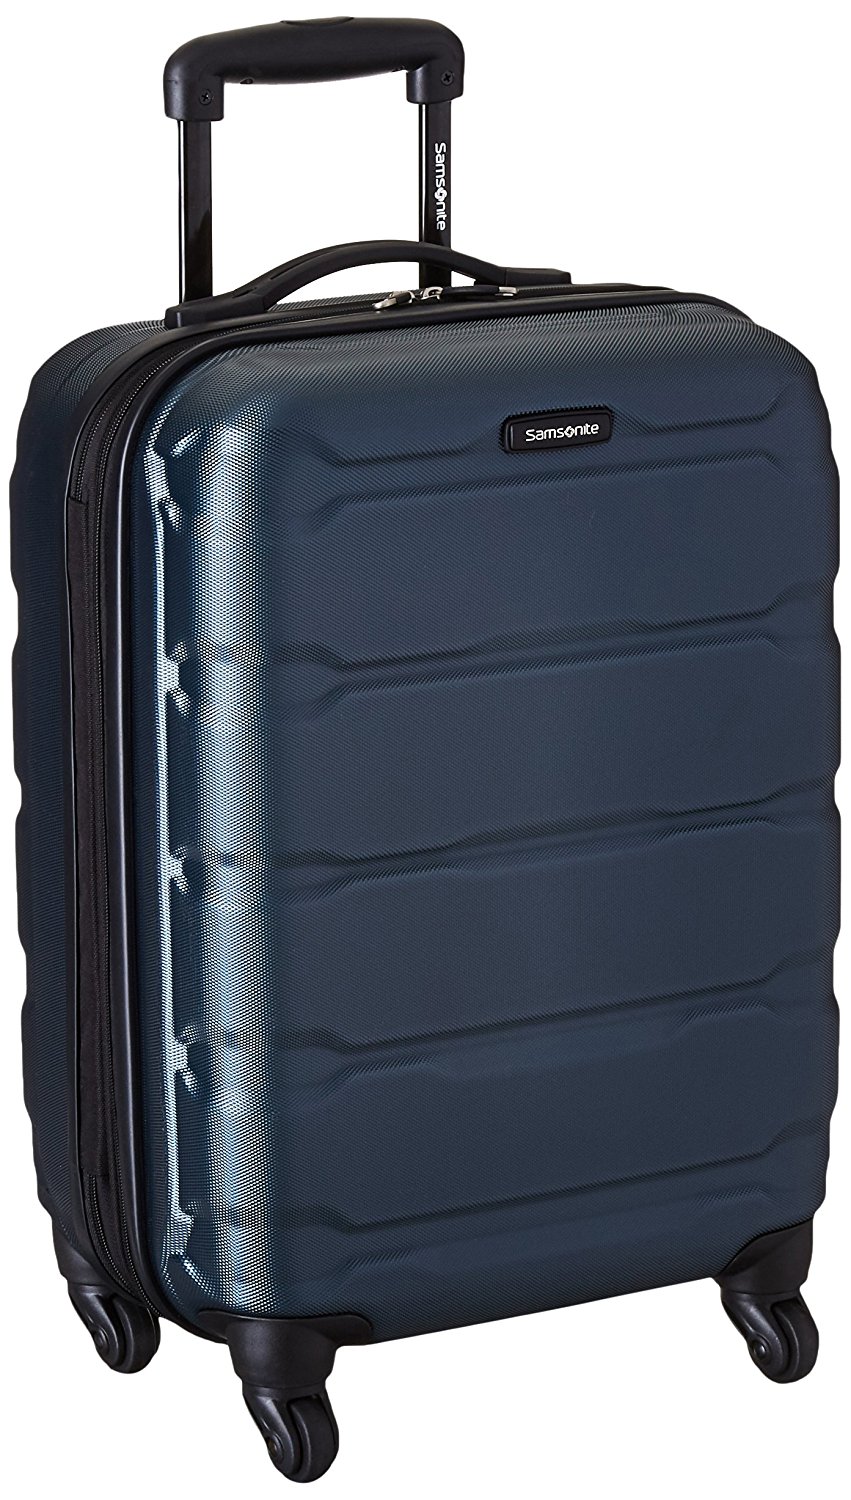 Best Carry-on Luggage in 2019 | iMore